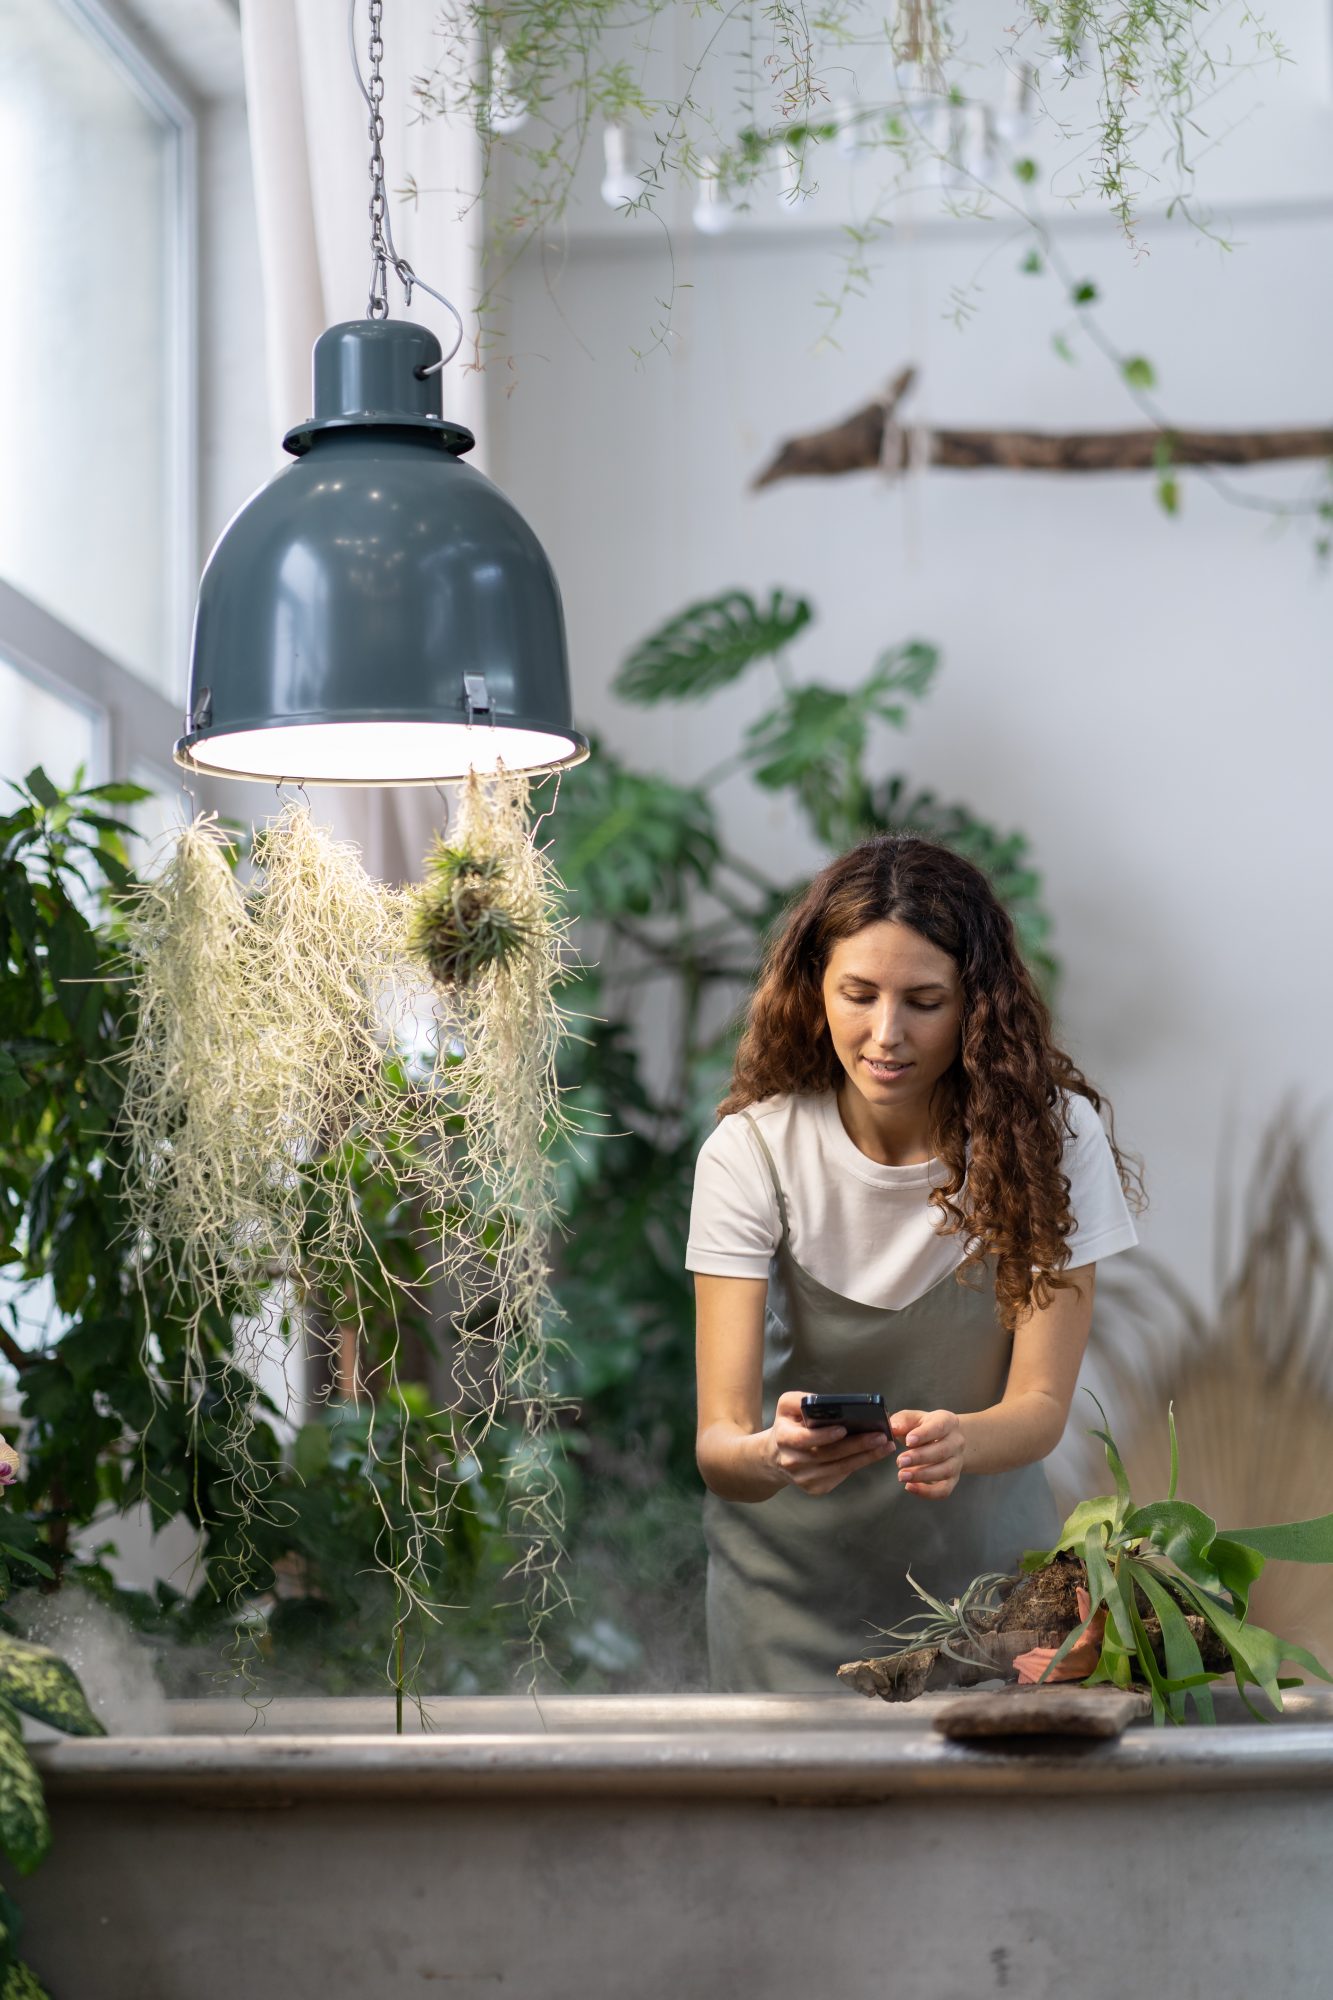 Woman taking photos of plants over bath in room surrounded by houseplants 